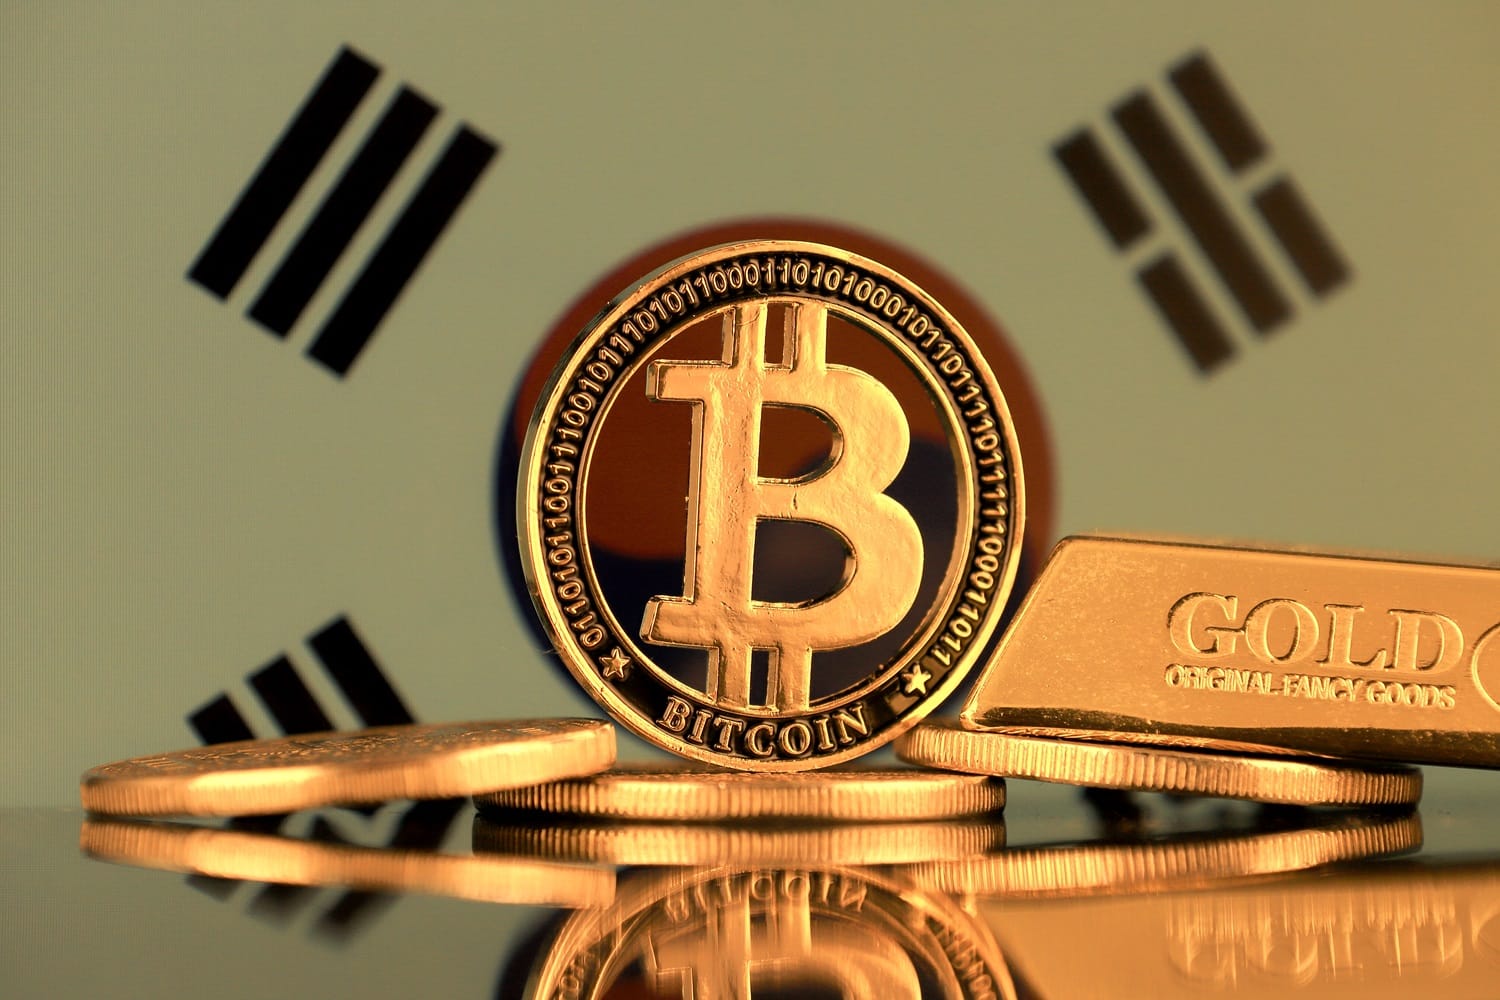 Metal coins intended to represent Bitcoin and a gold bar against the background of the South Korean flag.